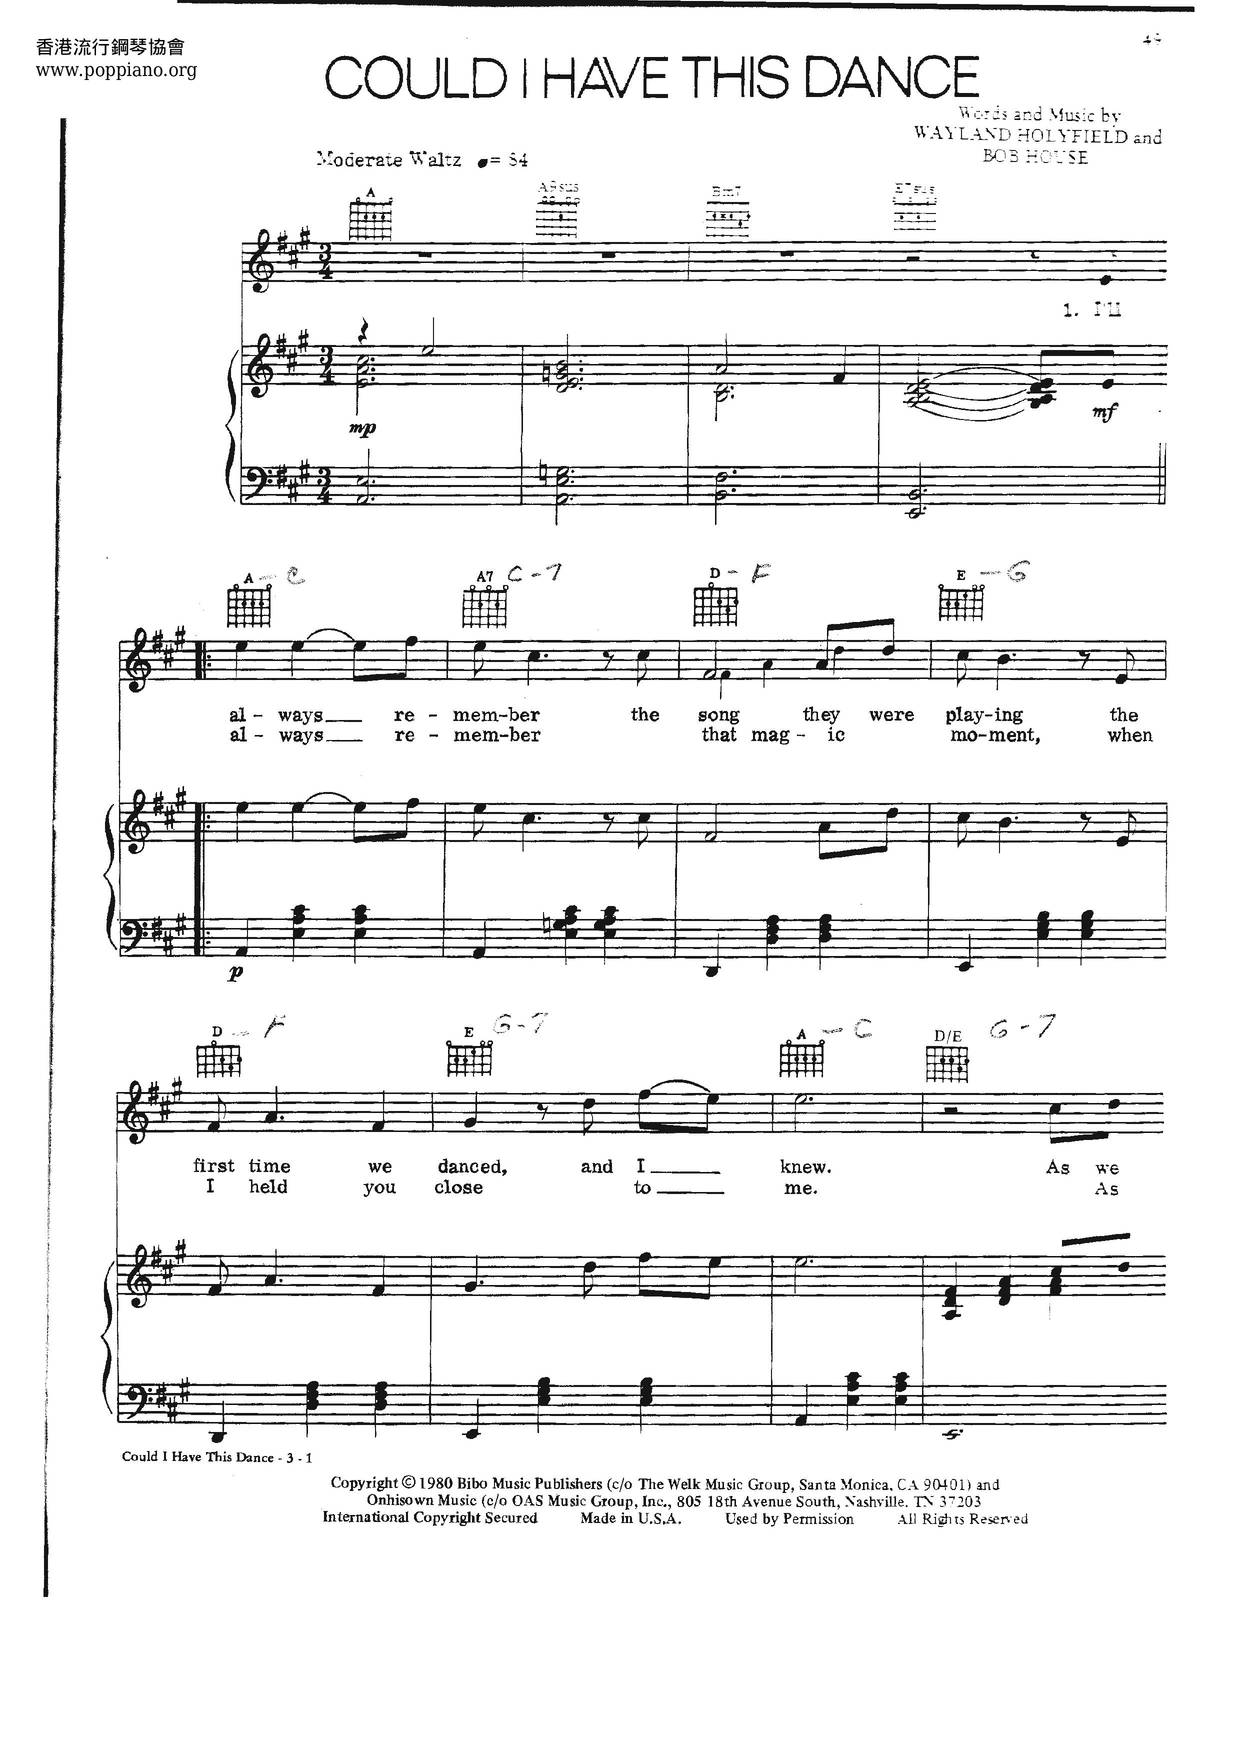 Anne Murray Could I Have This Dance Sheet Music Pdf Free Score Download